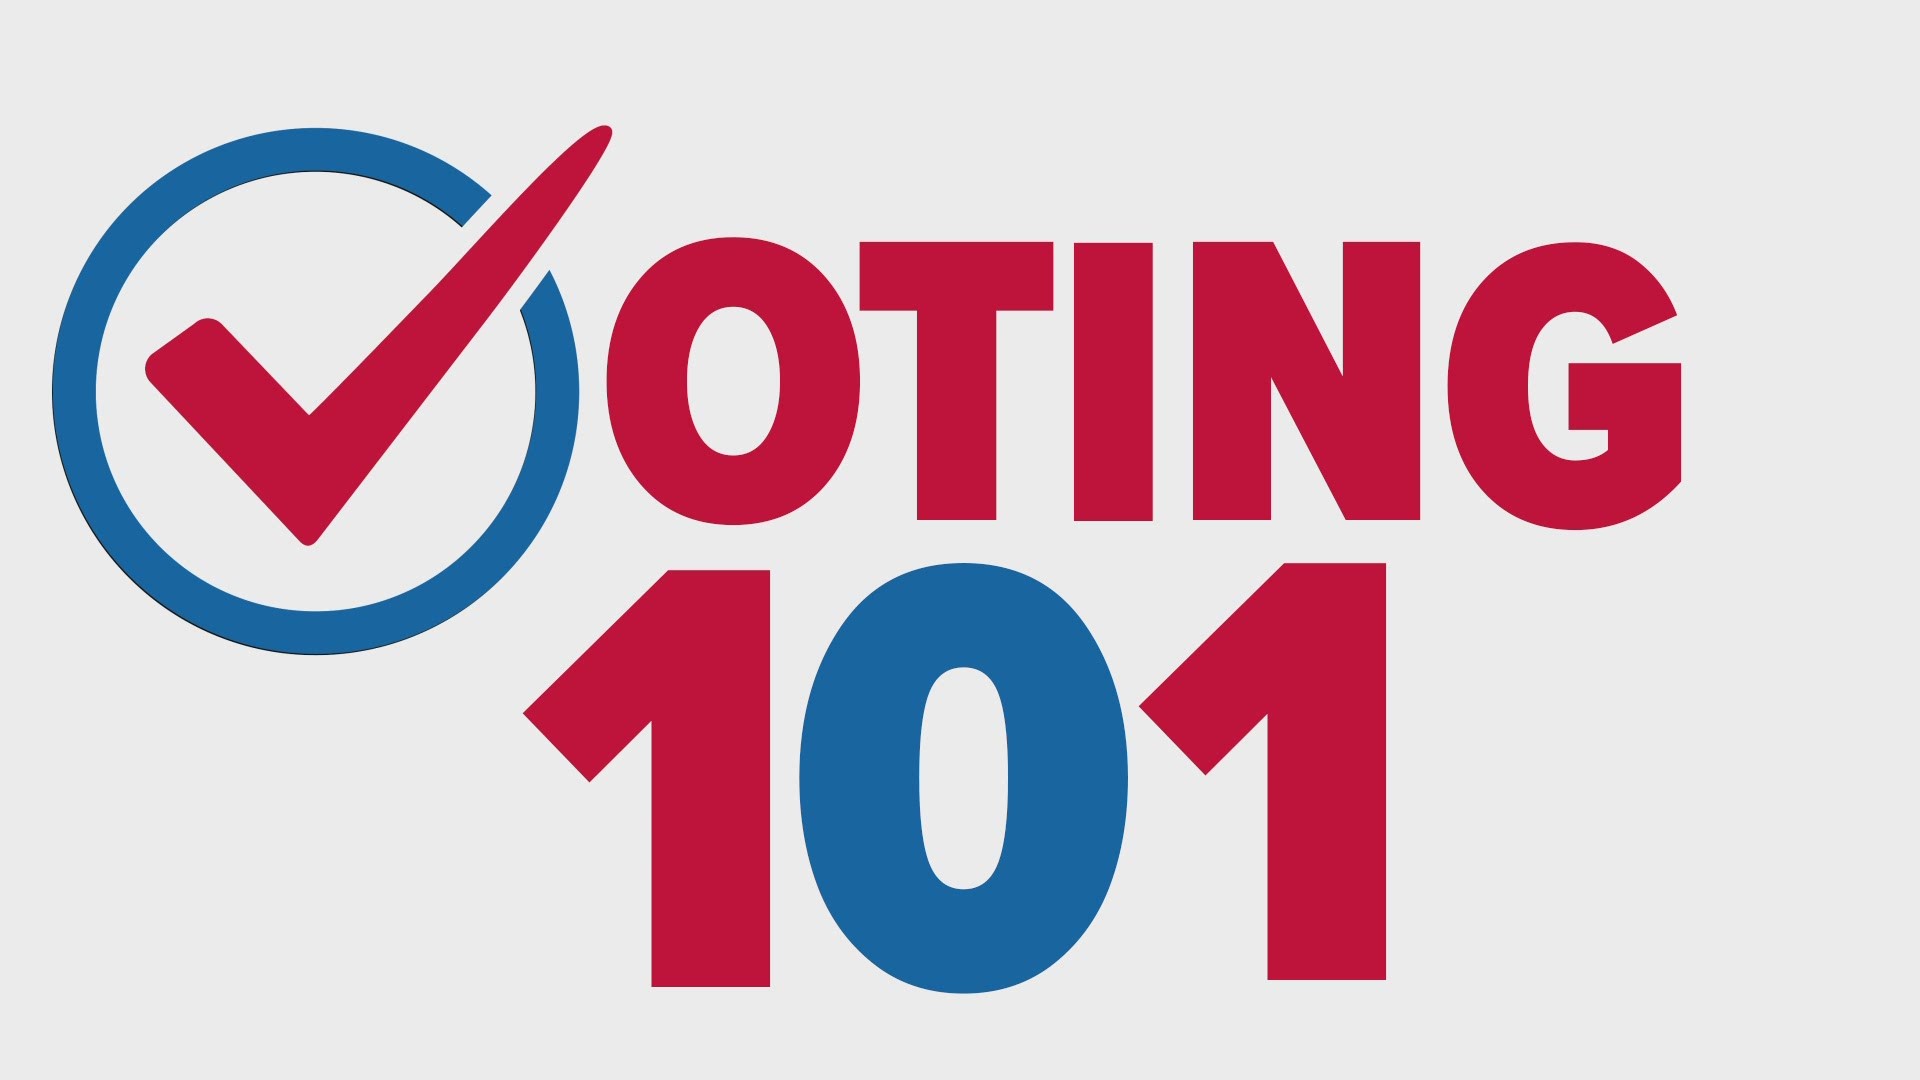 If you're voting in person in Kentucky, you will need a form of identification to cast your ballot. For 2020, that ID will need your picture, too.